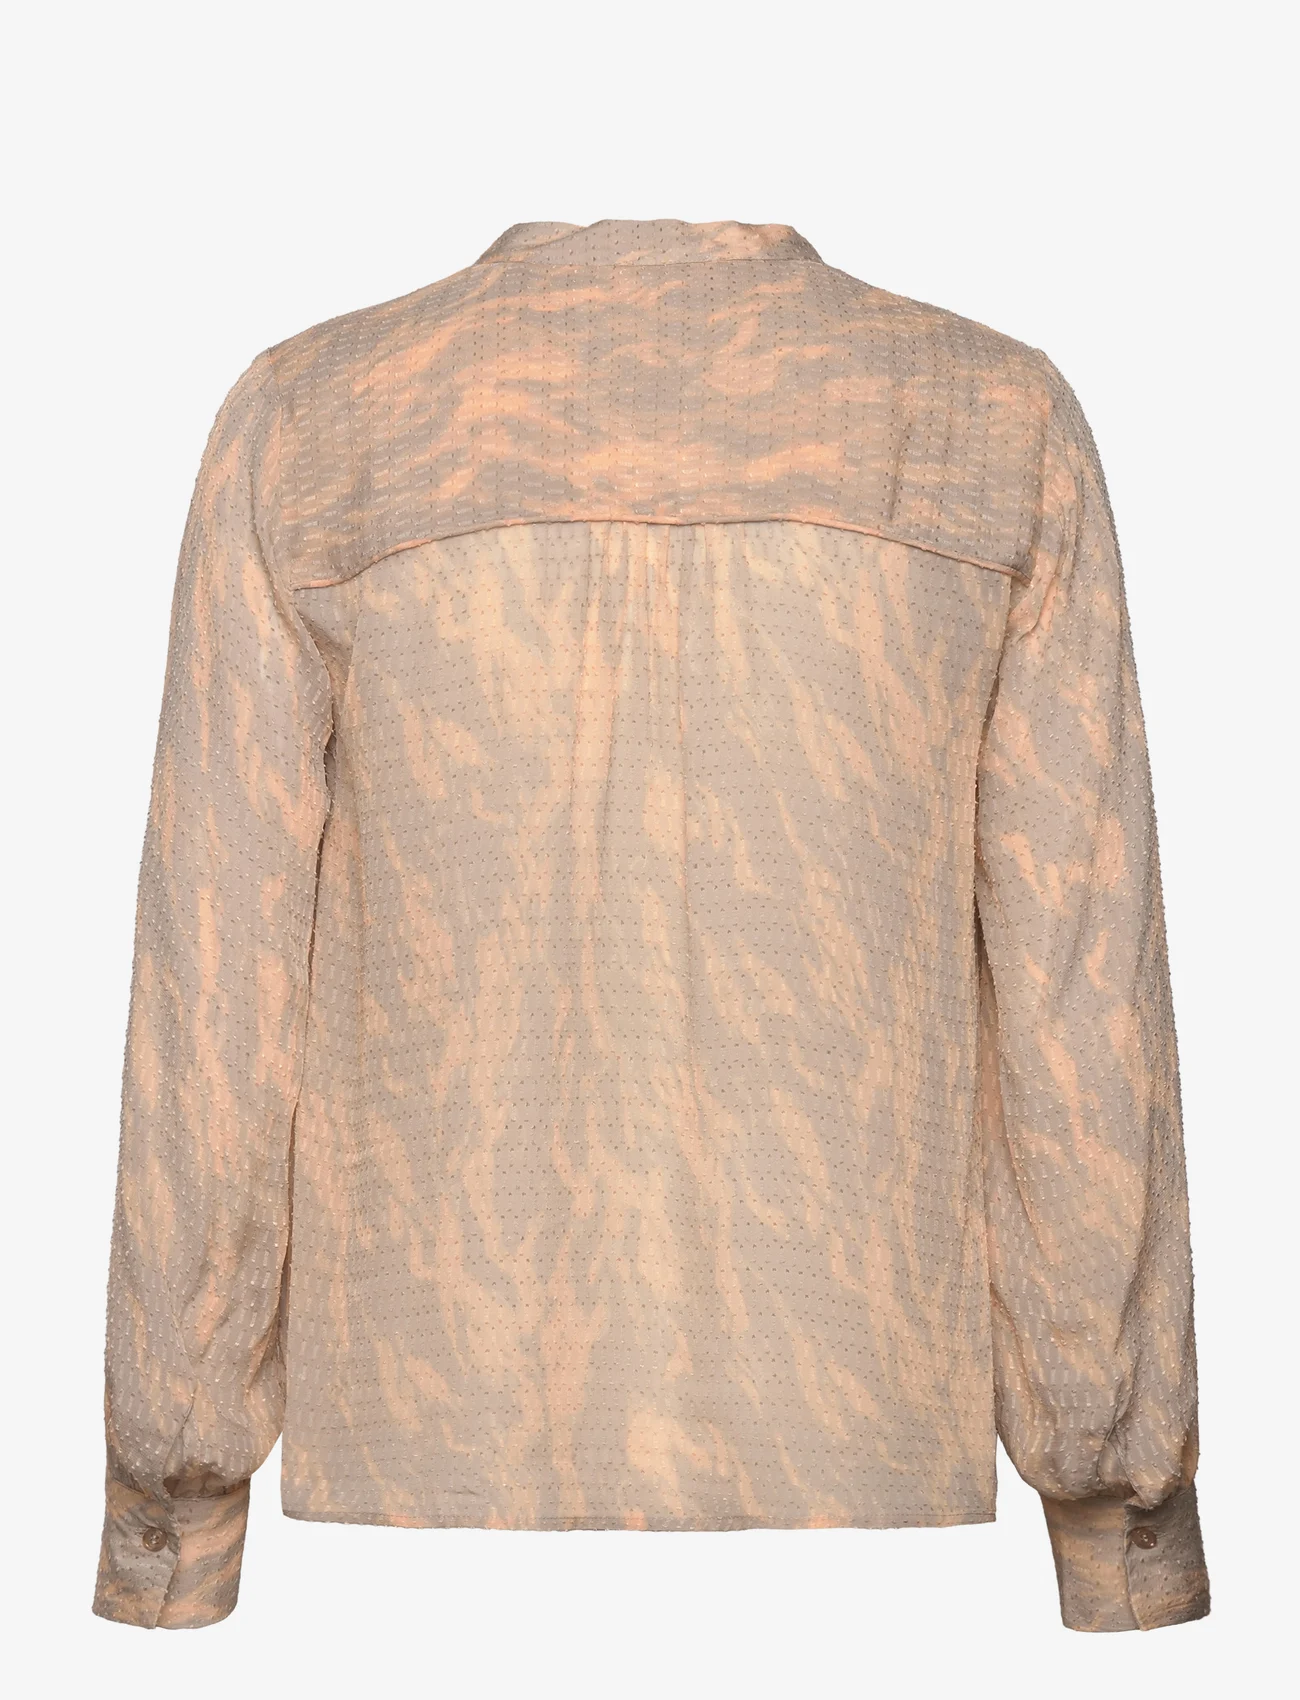 Levete Room - LR-FIA - long-sleeved blouses - apricot ice combi - 1